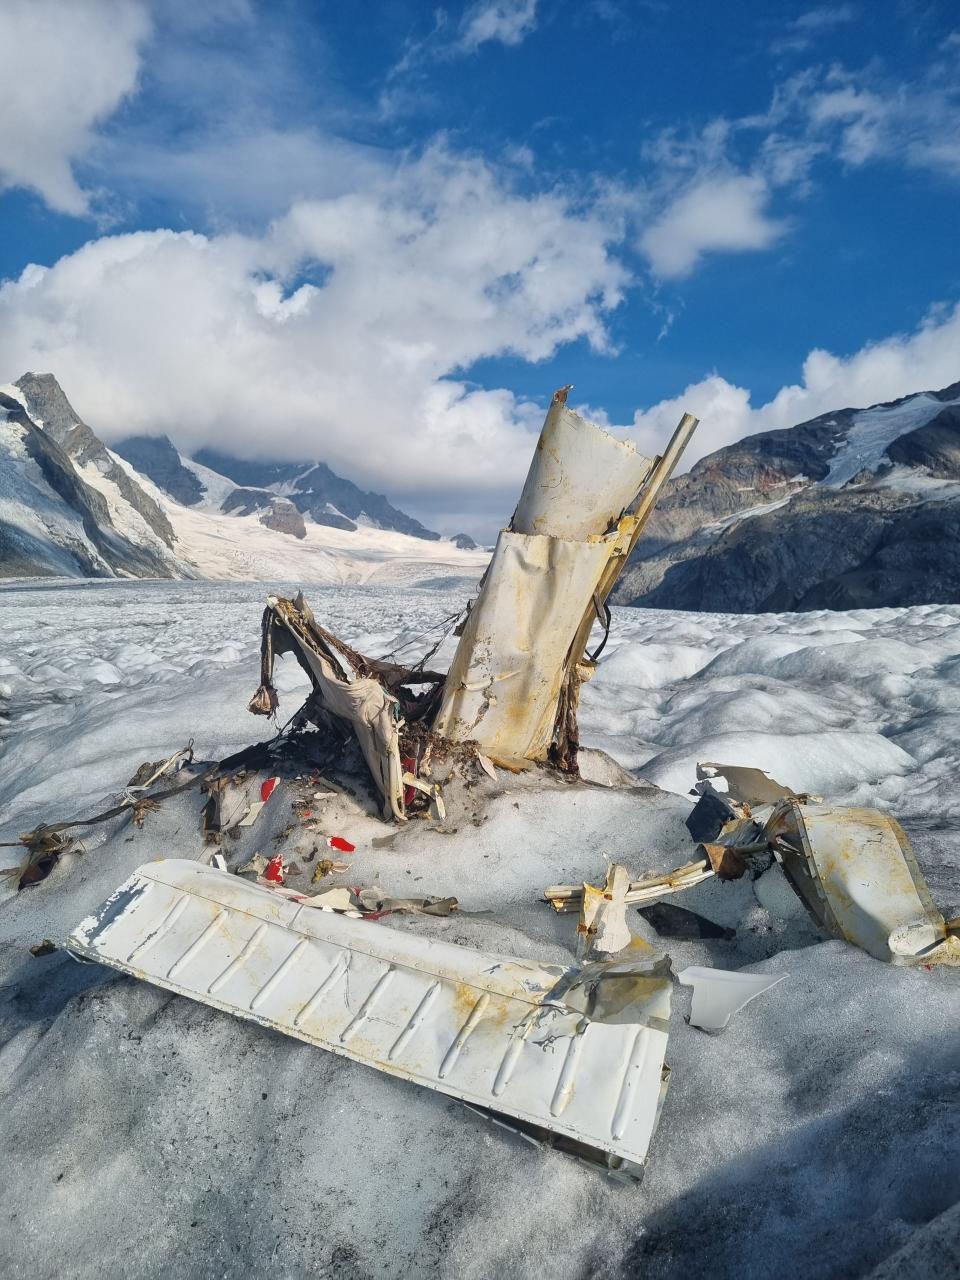 Switzerland’s melting glaciers revealed the remains of a 1968 plane.